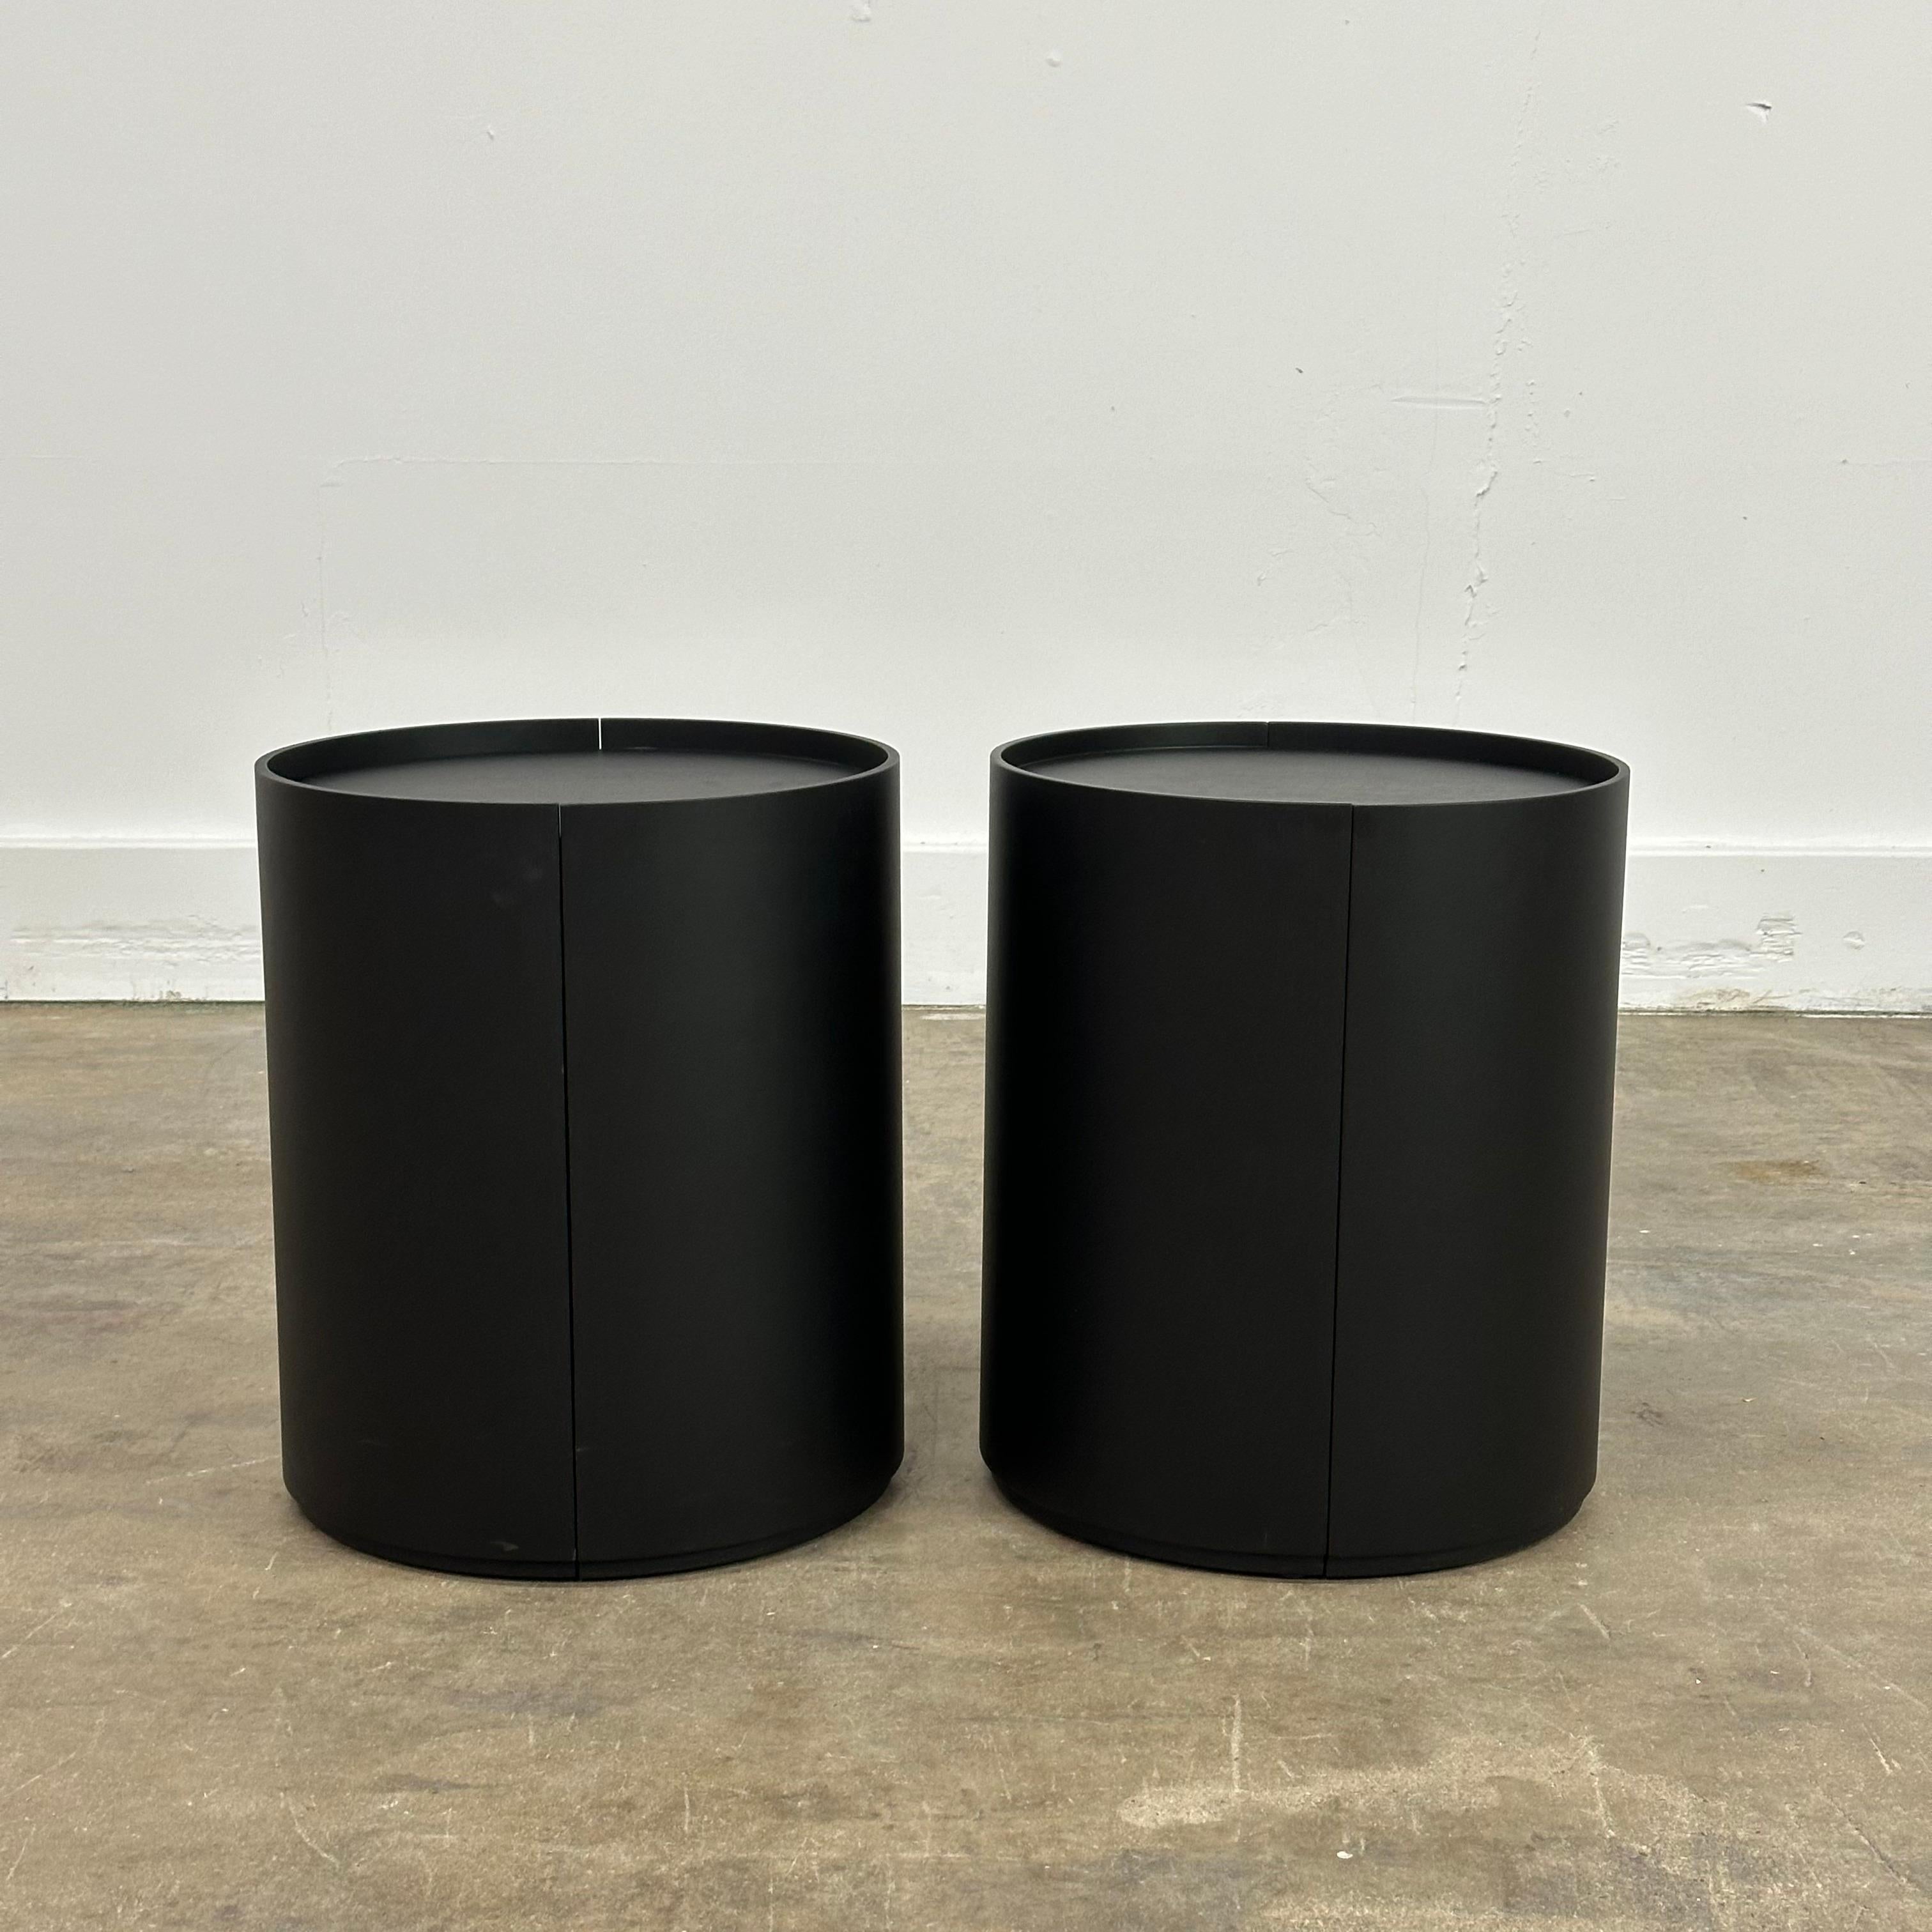 Pair of Moon Bedside Tables by Mist-O for Living Divani. Moon is composed of two semi-cylinders that reveal its internal surfaces when opened. The two portions are hinged together, and magnets inside the structural frame ensure sturdy closure